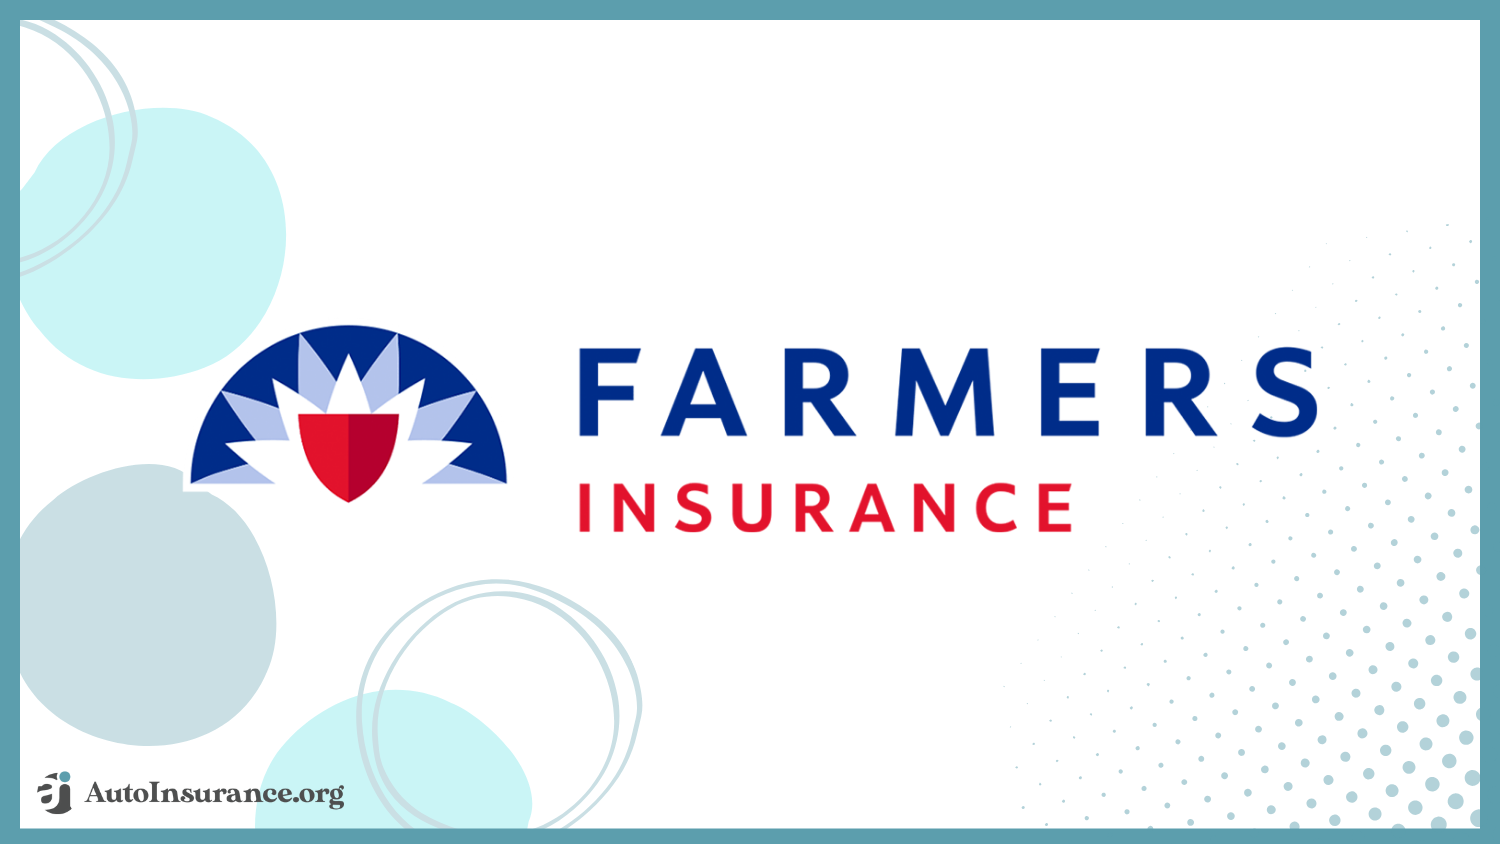 Farmers: Best Auto Insurance for Leased Vehicles